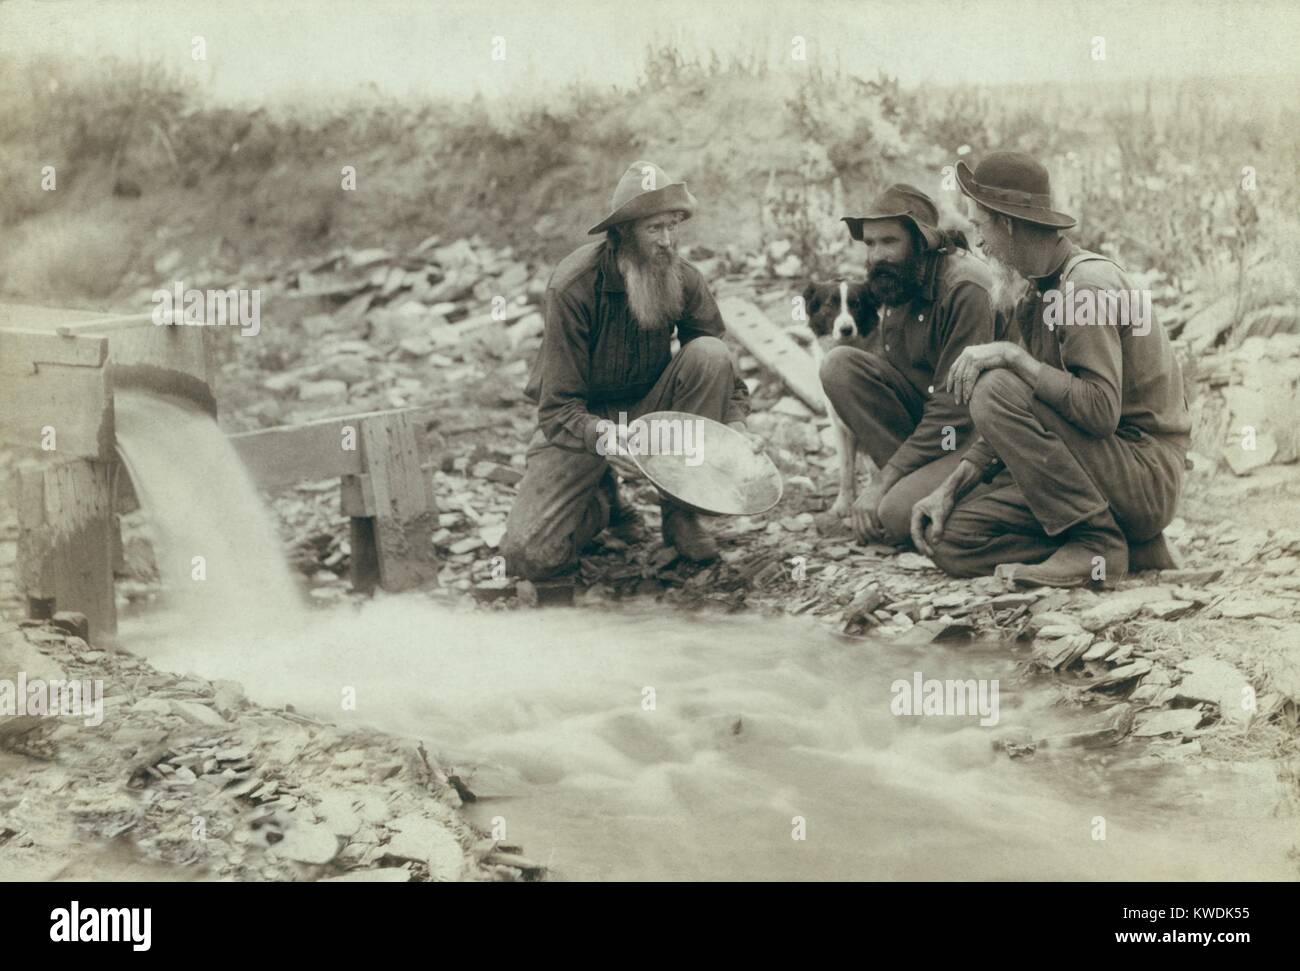 Three men panning for gold in a stream in the Black Hills of South Dakota in 1889. Old timers, Spriggs, Lamb, and Dillon may be die hard survivors from the Gold Rush of 1876. Photo by John Grabill, Jan. 1889 (BSLOC 2017 18 52) Stock Photo